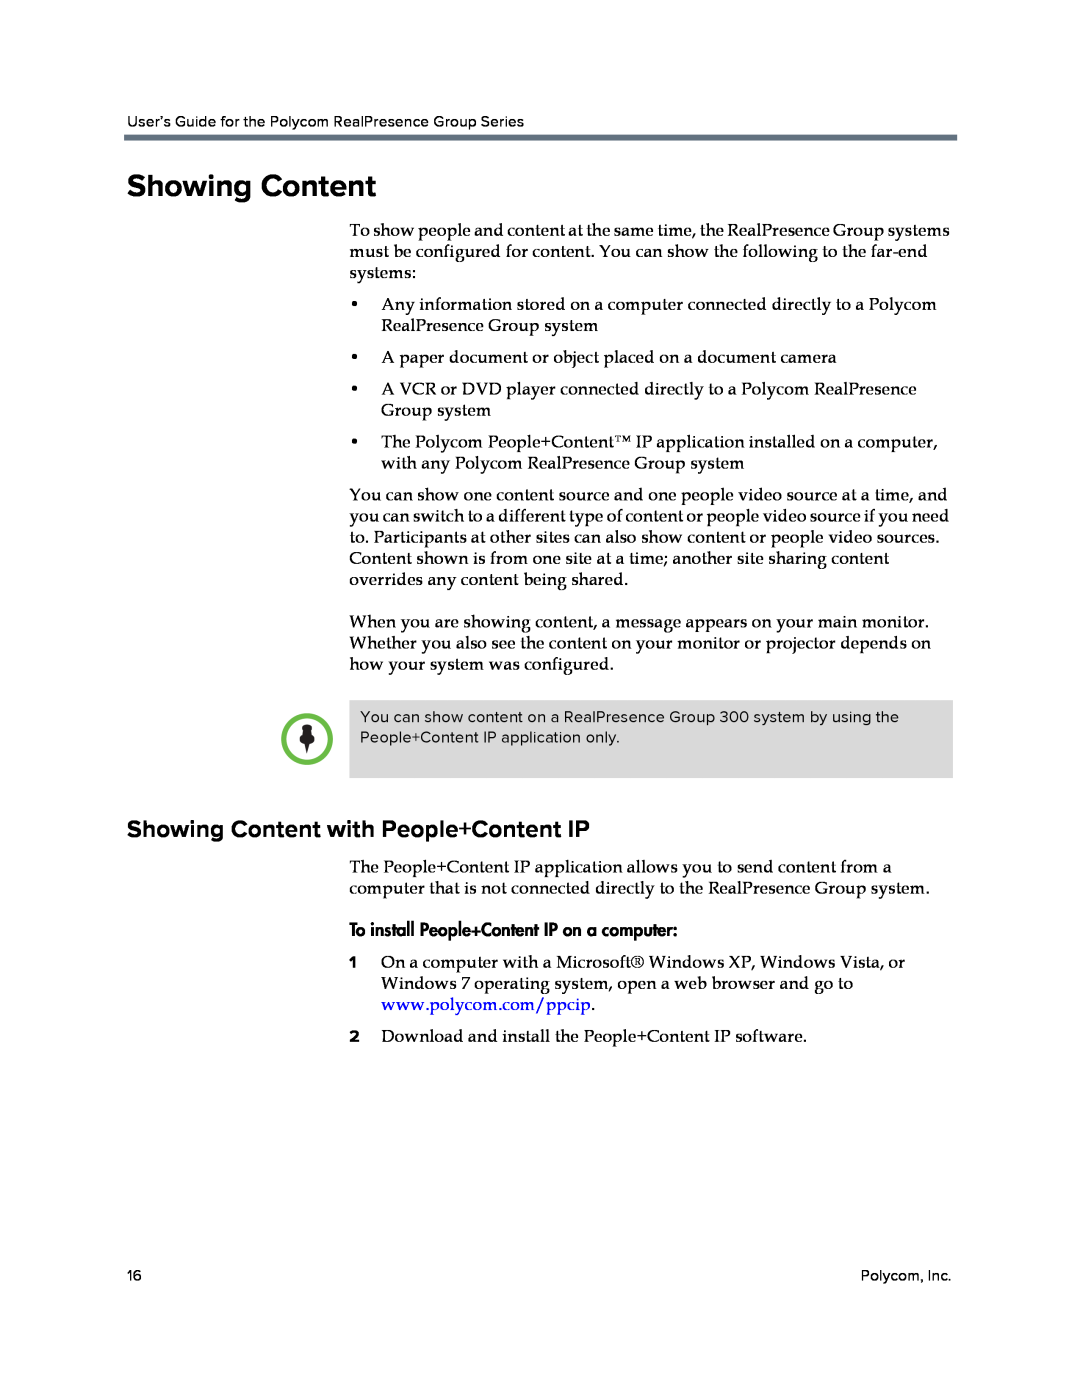 Polycom P001 manual Showing Content with People+Content IP 